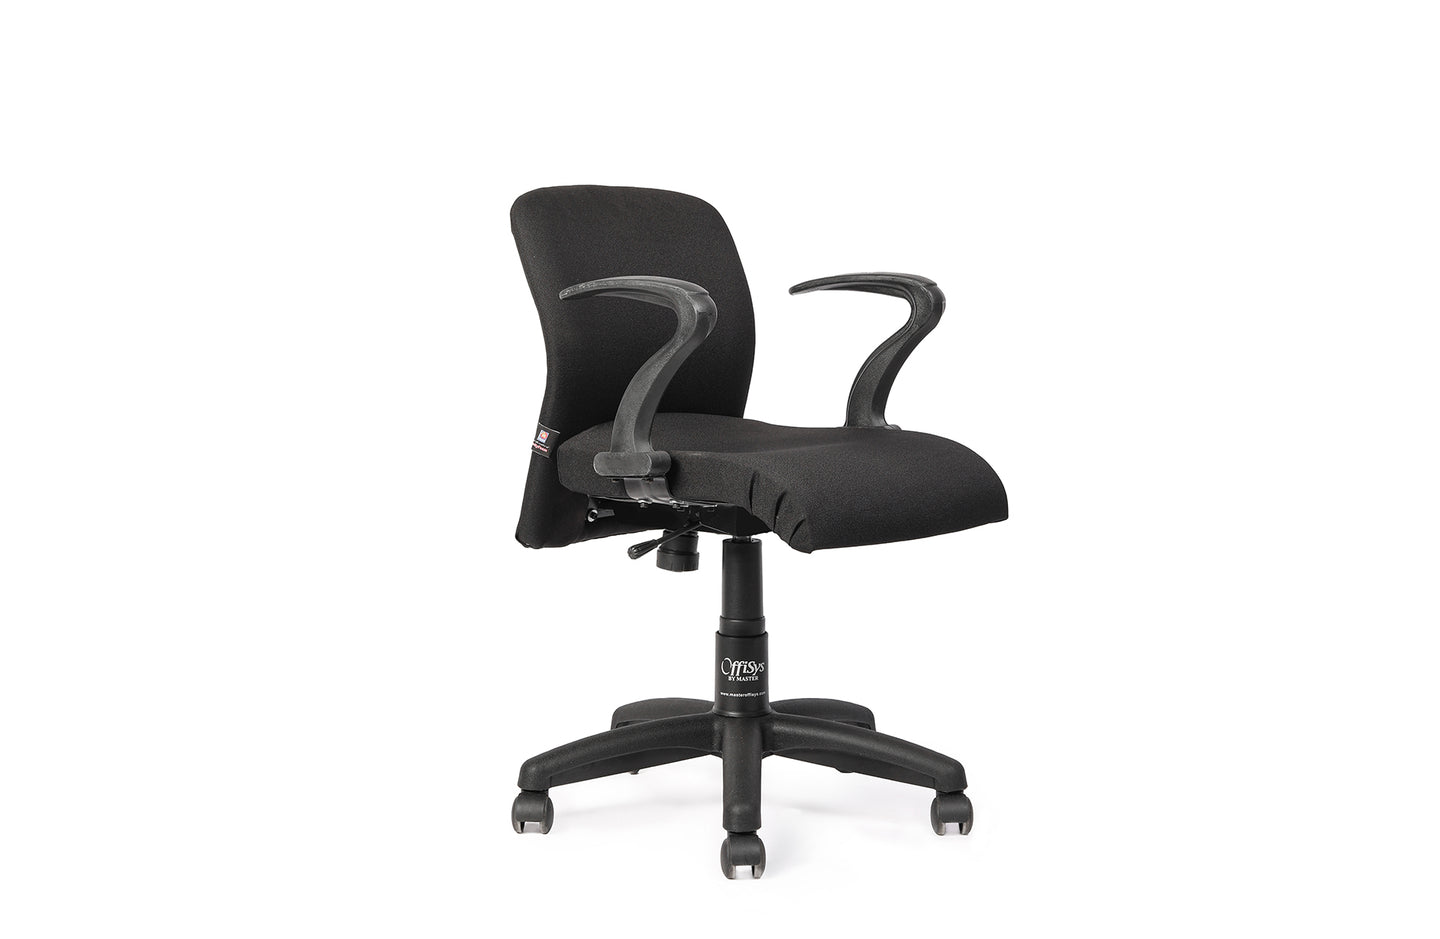 Anatom Low Back Chair in PU Arm Rest